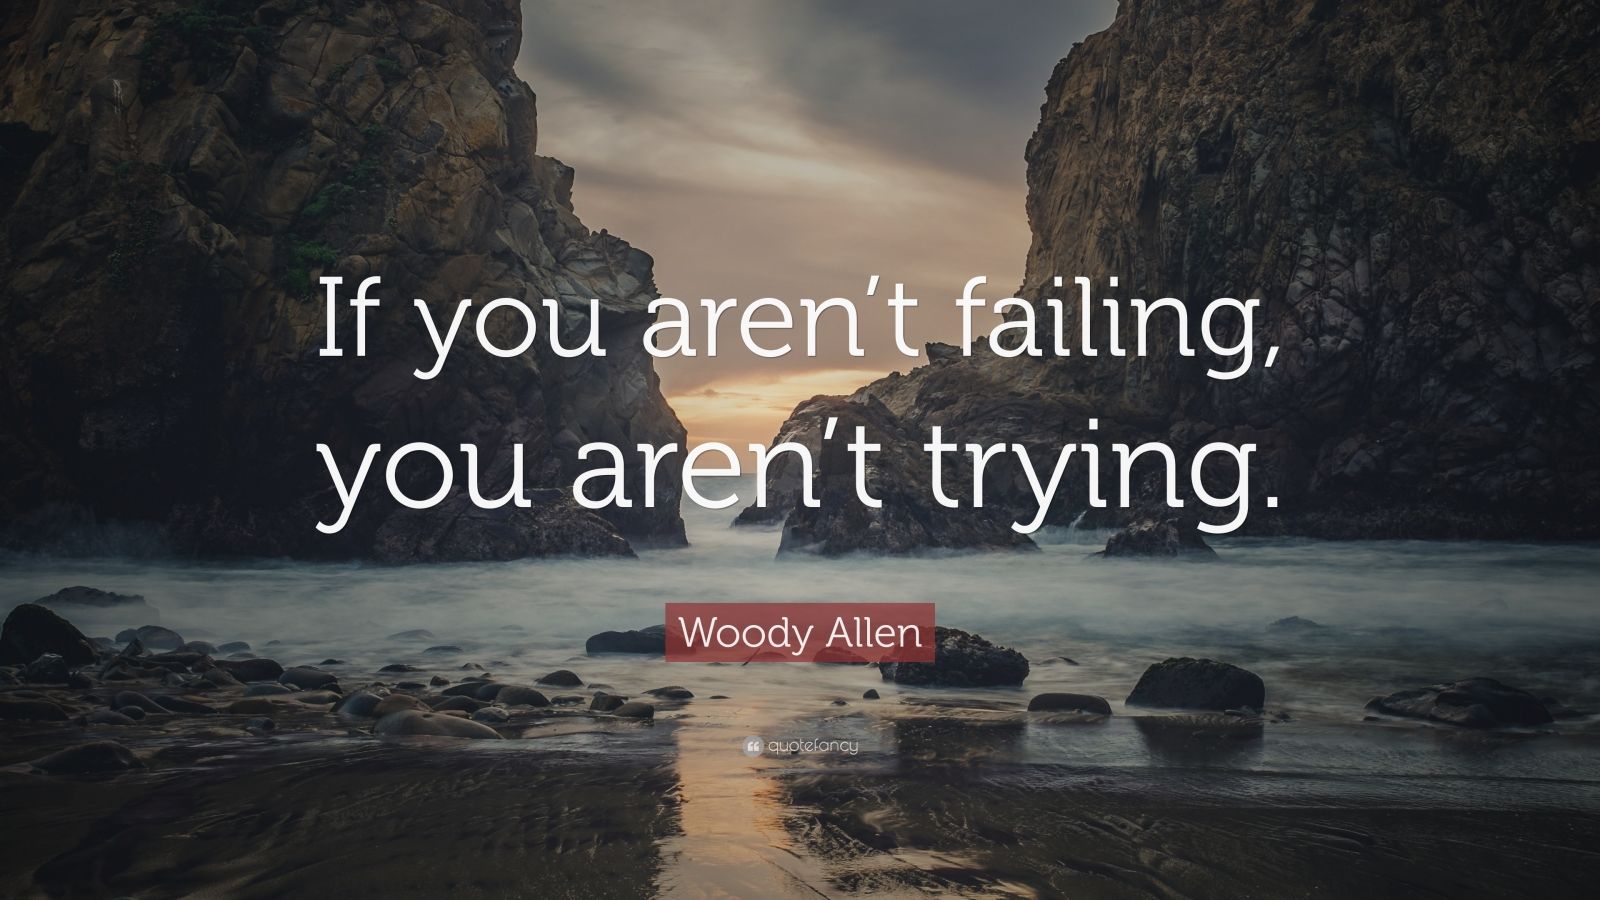 Woody Allen Quote: “If you aren’t failing, you aren’t trying.” (7 ...